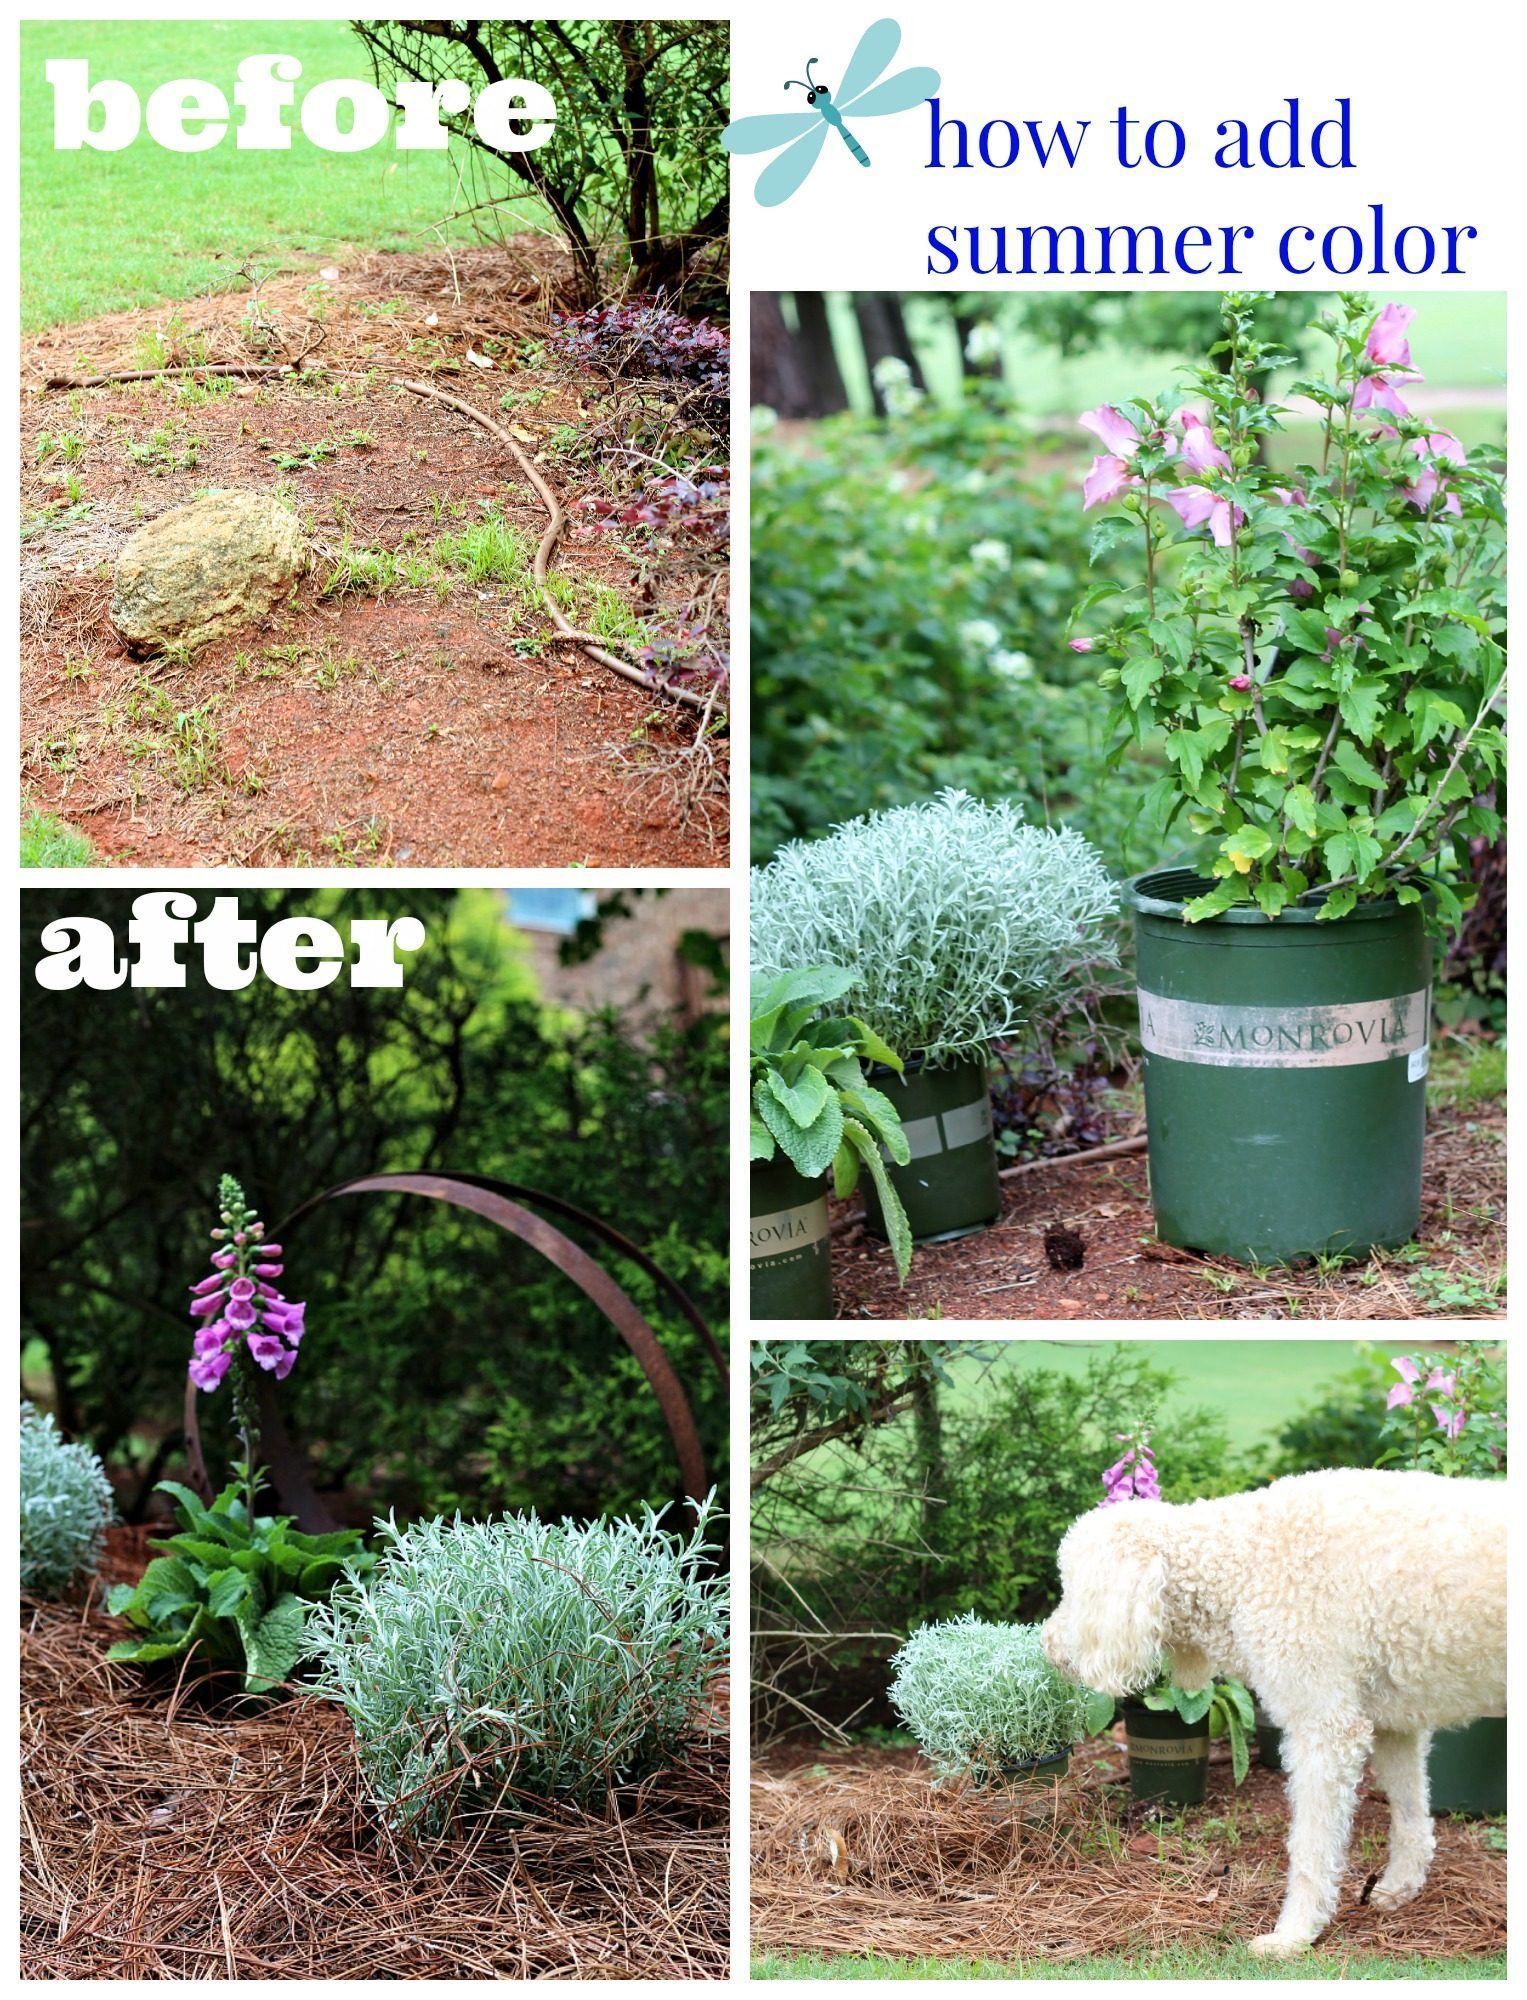 Foxgloves, Lavender and Rose of Sharon are great for adding color